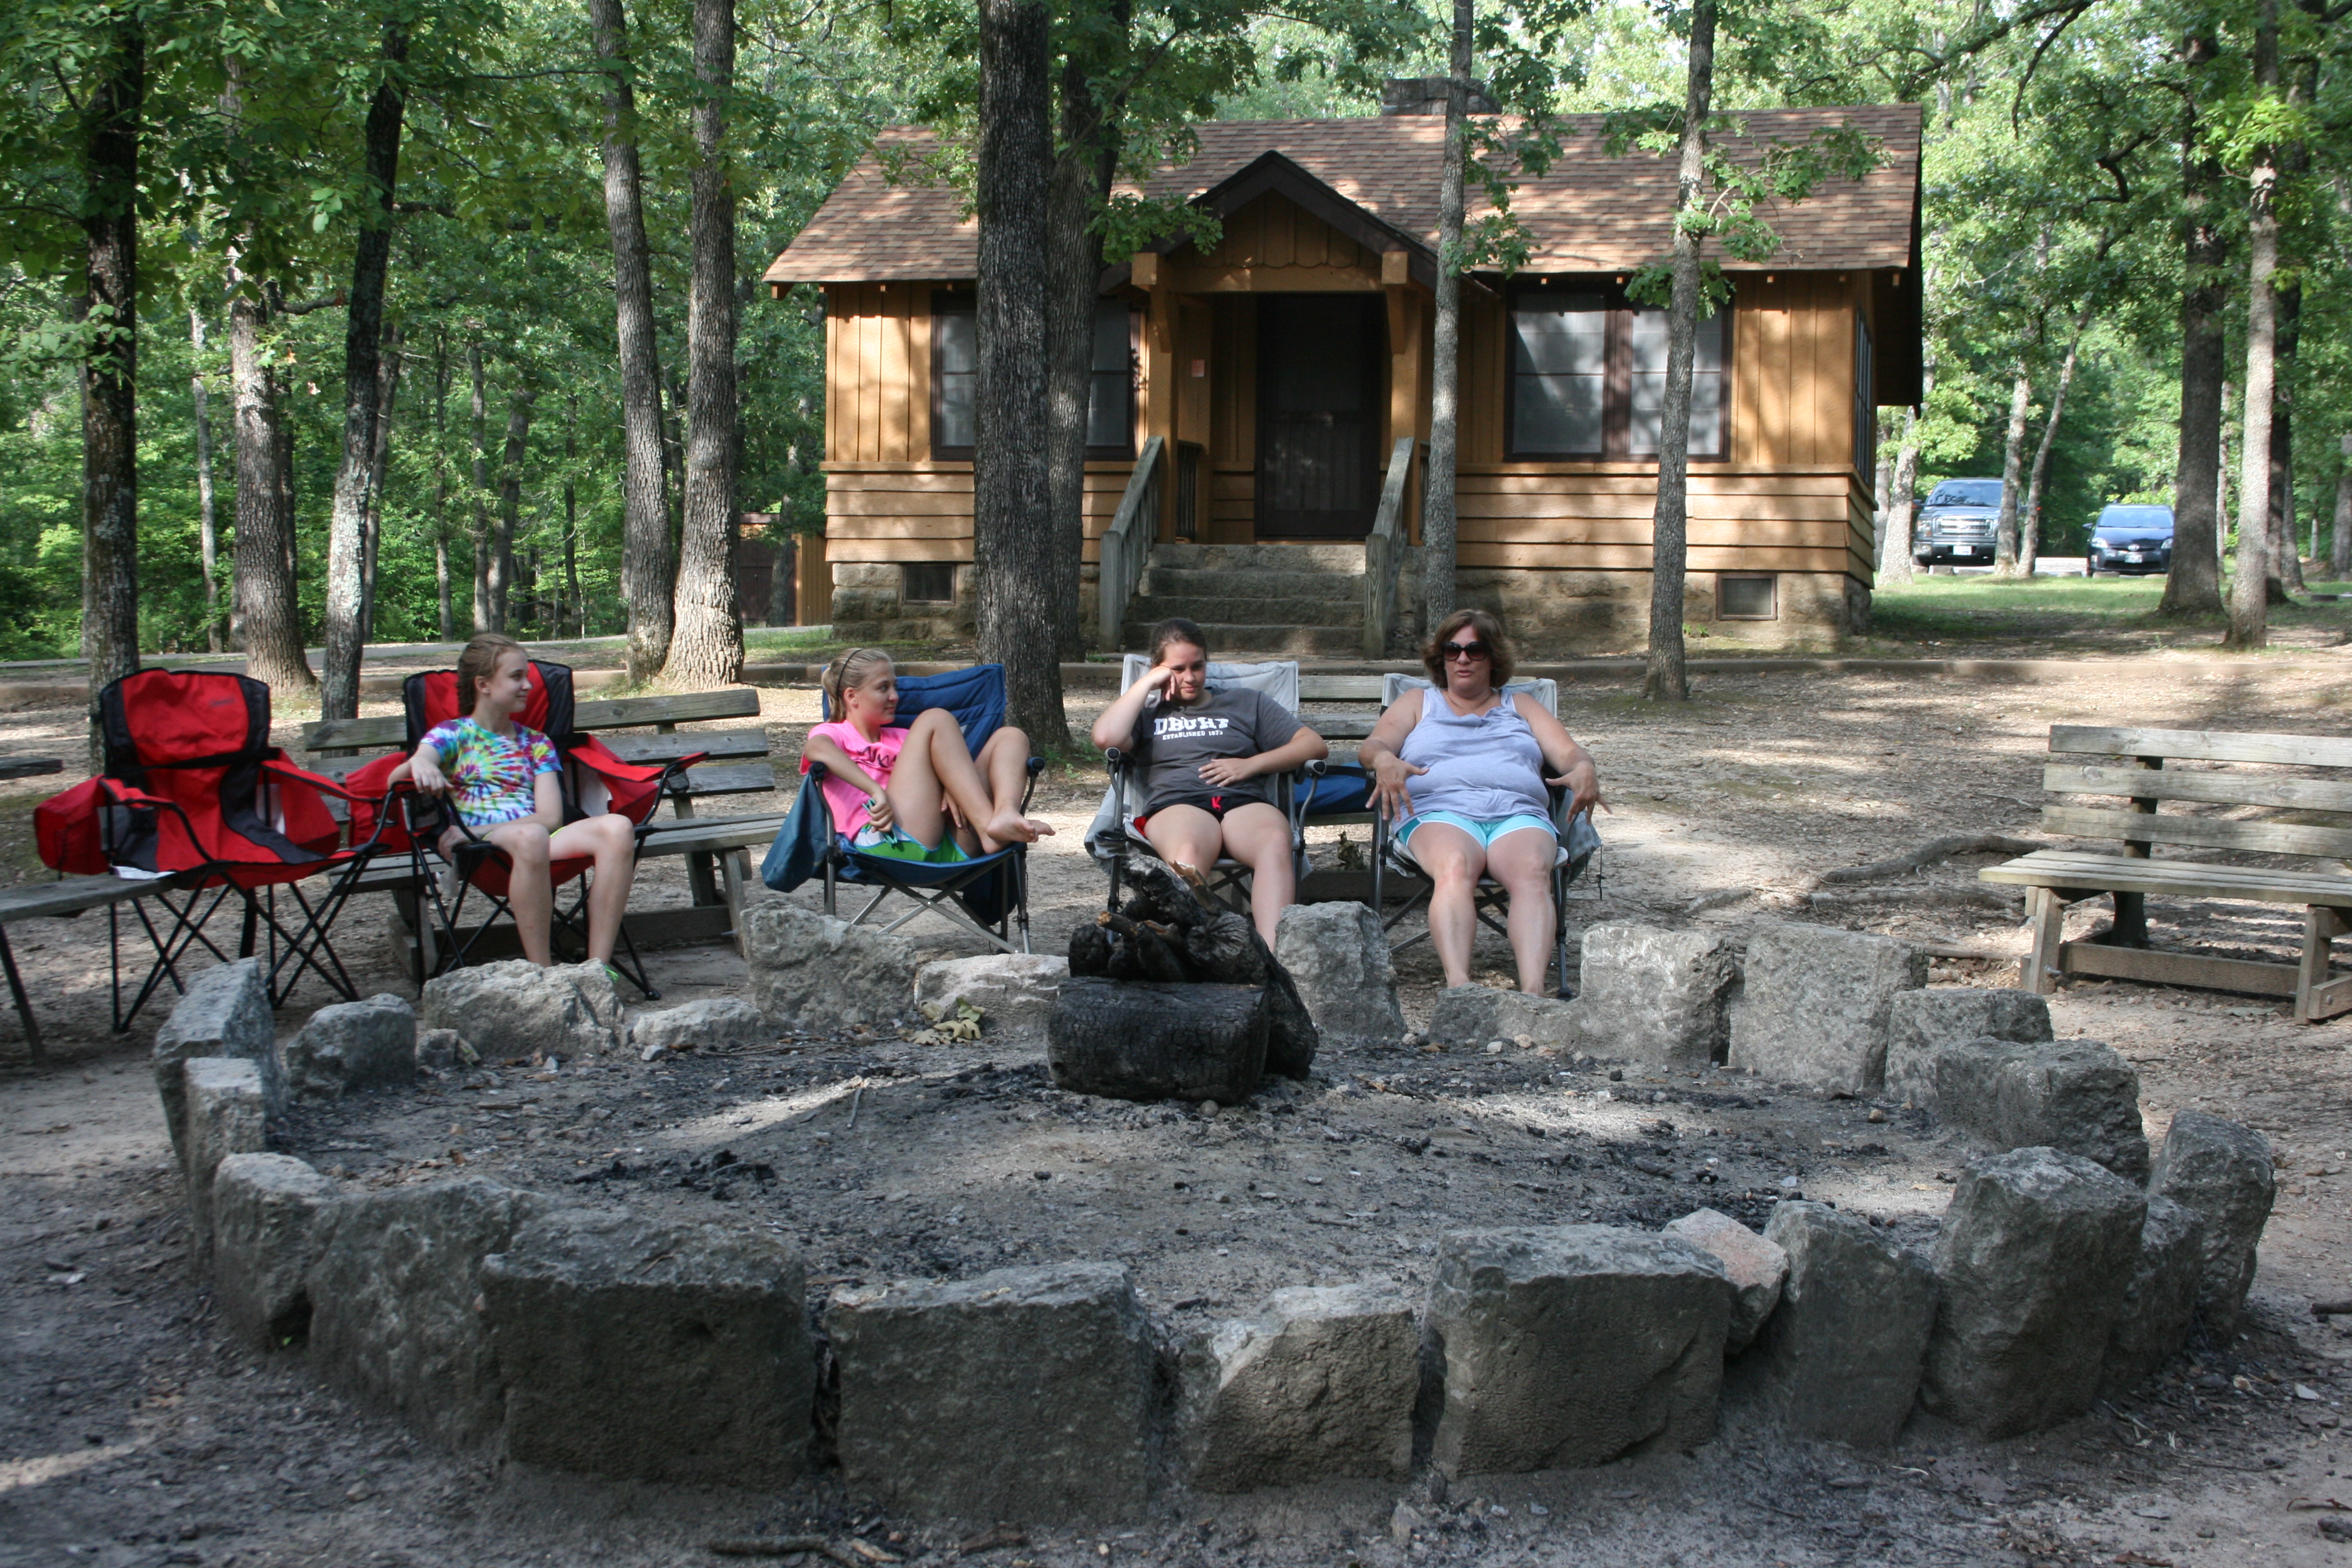 people sitting around the group fire ring